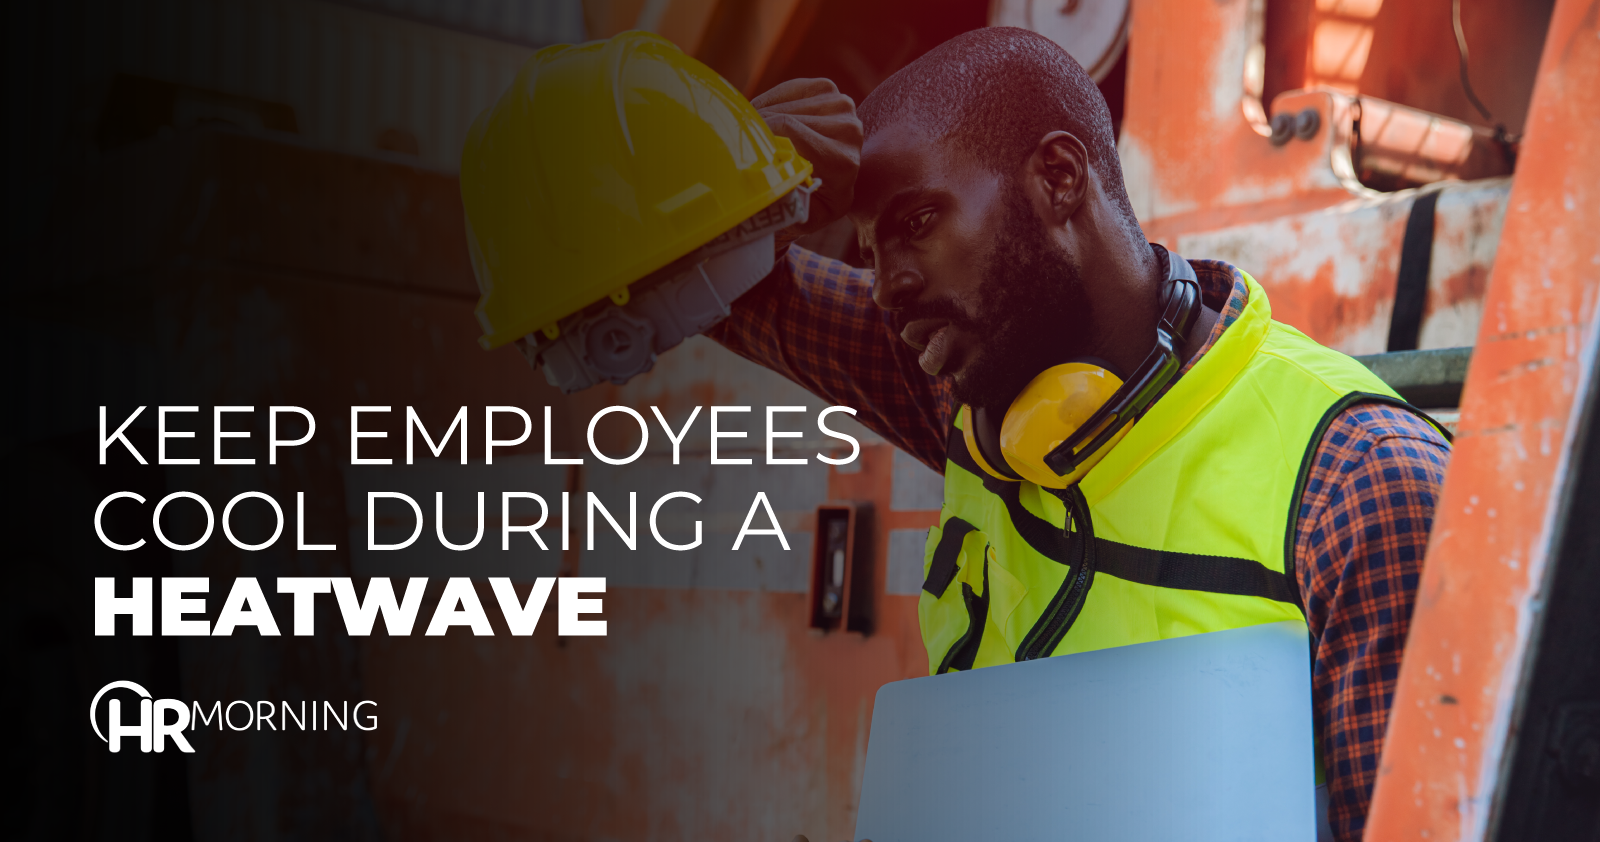 Keep Employees Cool During A Heatwave